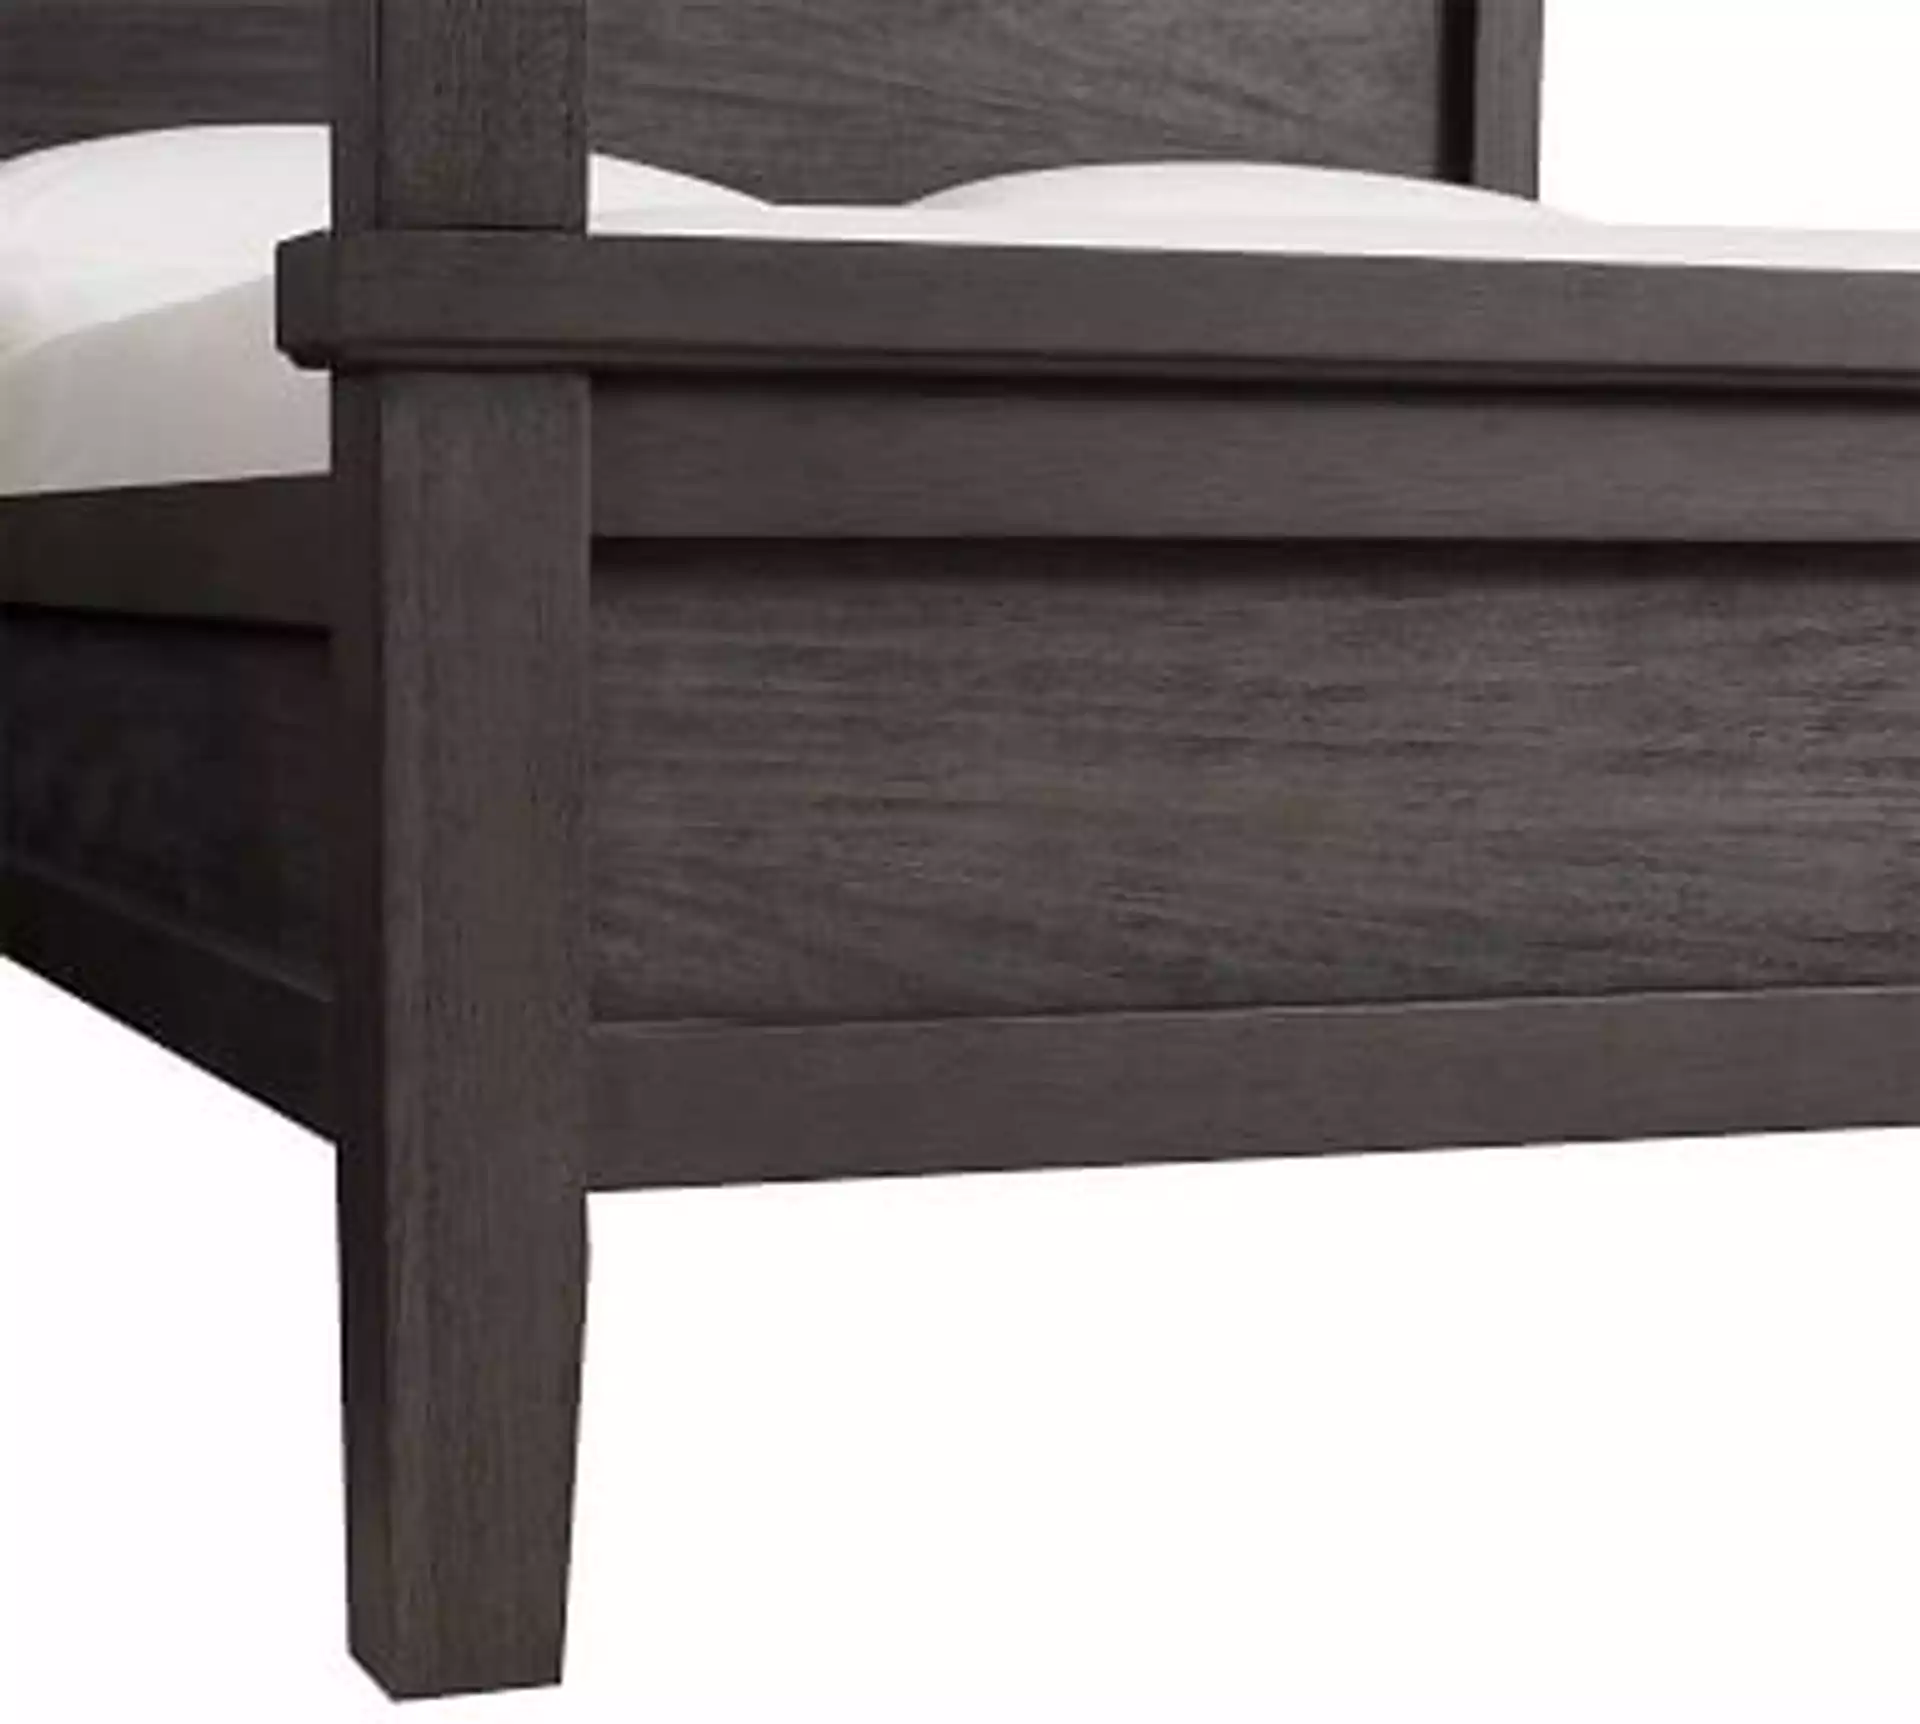 Farmhouse Bed, Queen, Charcoal